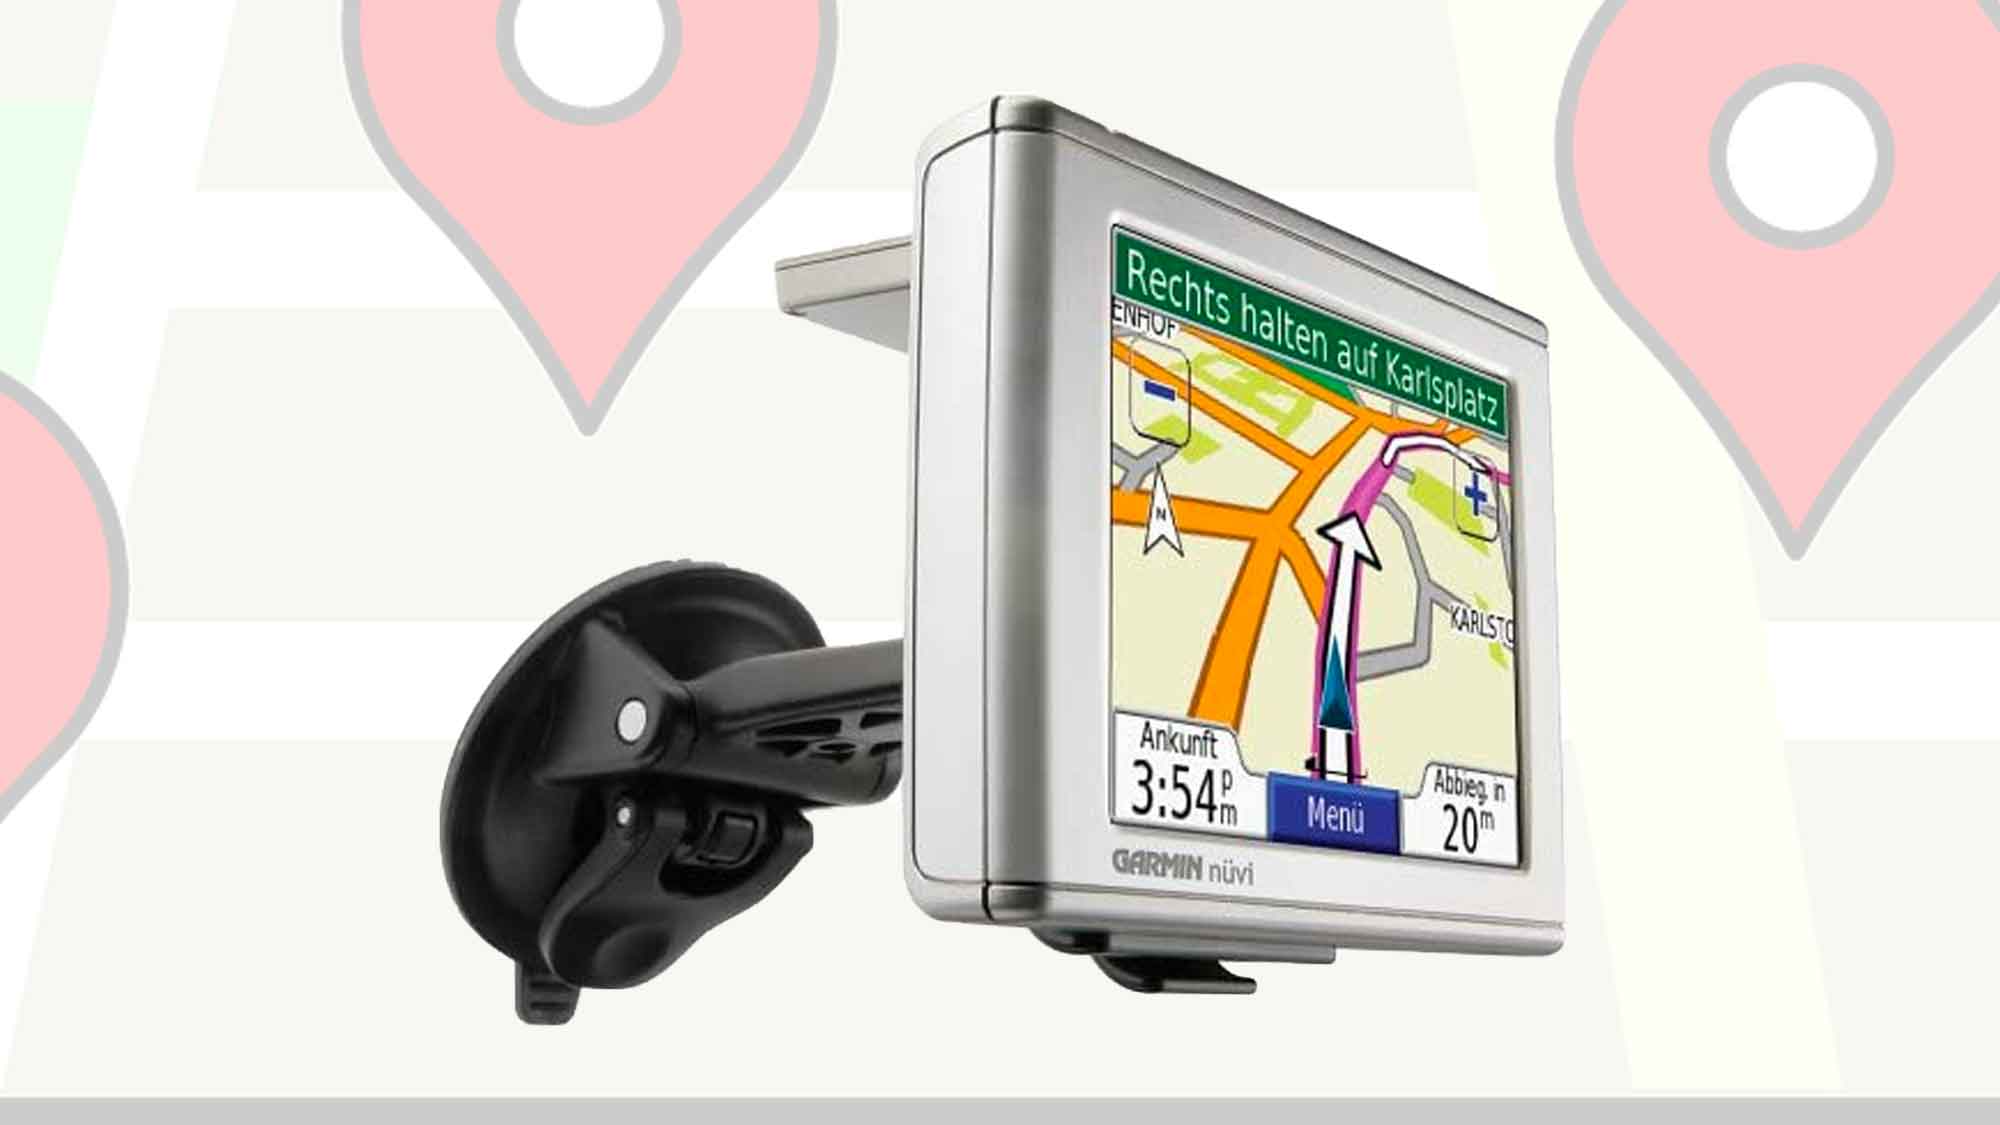 Never Get Lost Again With The Garmin Nuvi 360 GPS - Review